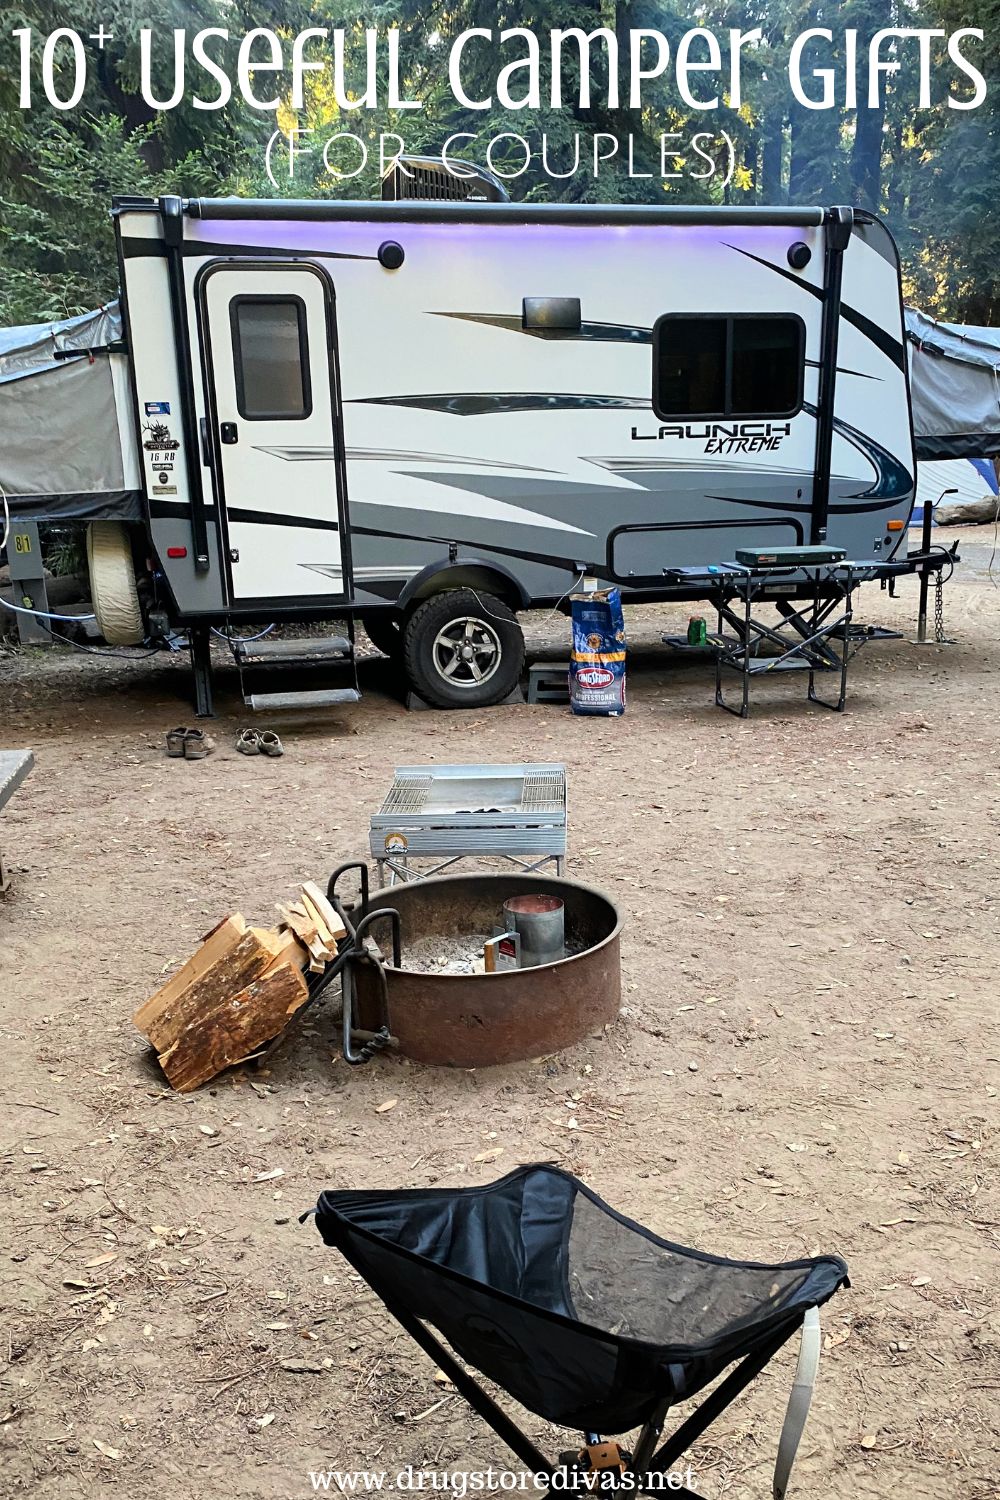 An RV camper on a campsite with a chair and firepit in front of it and the words 